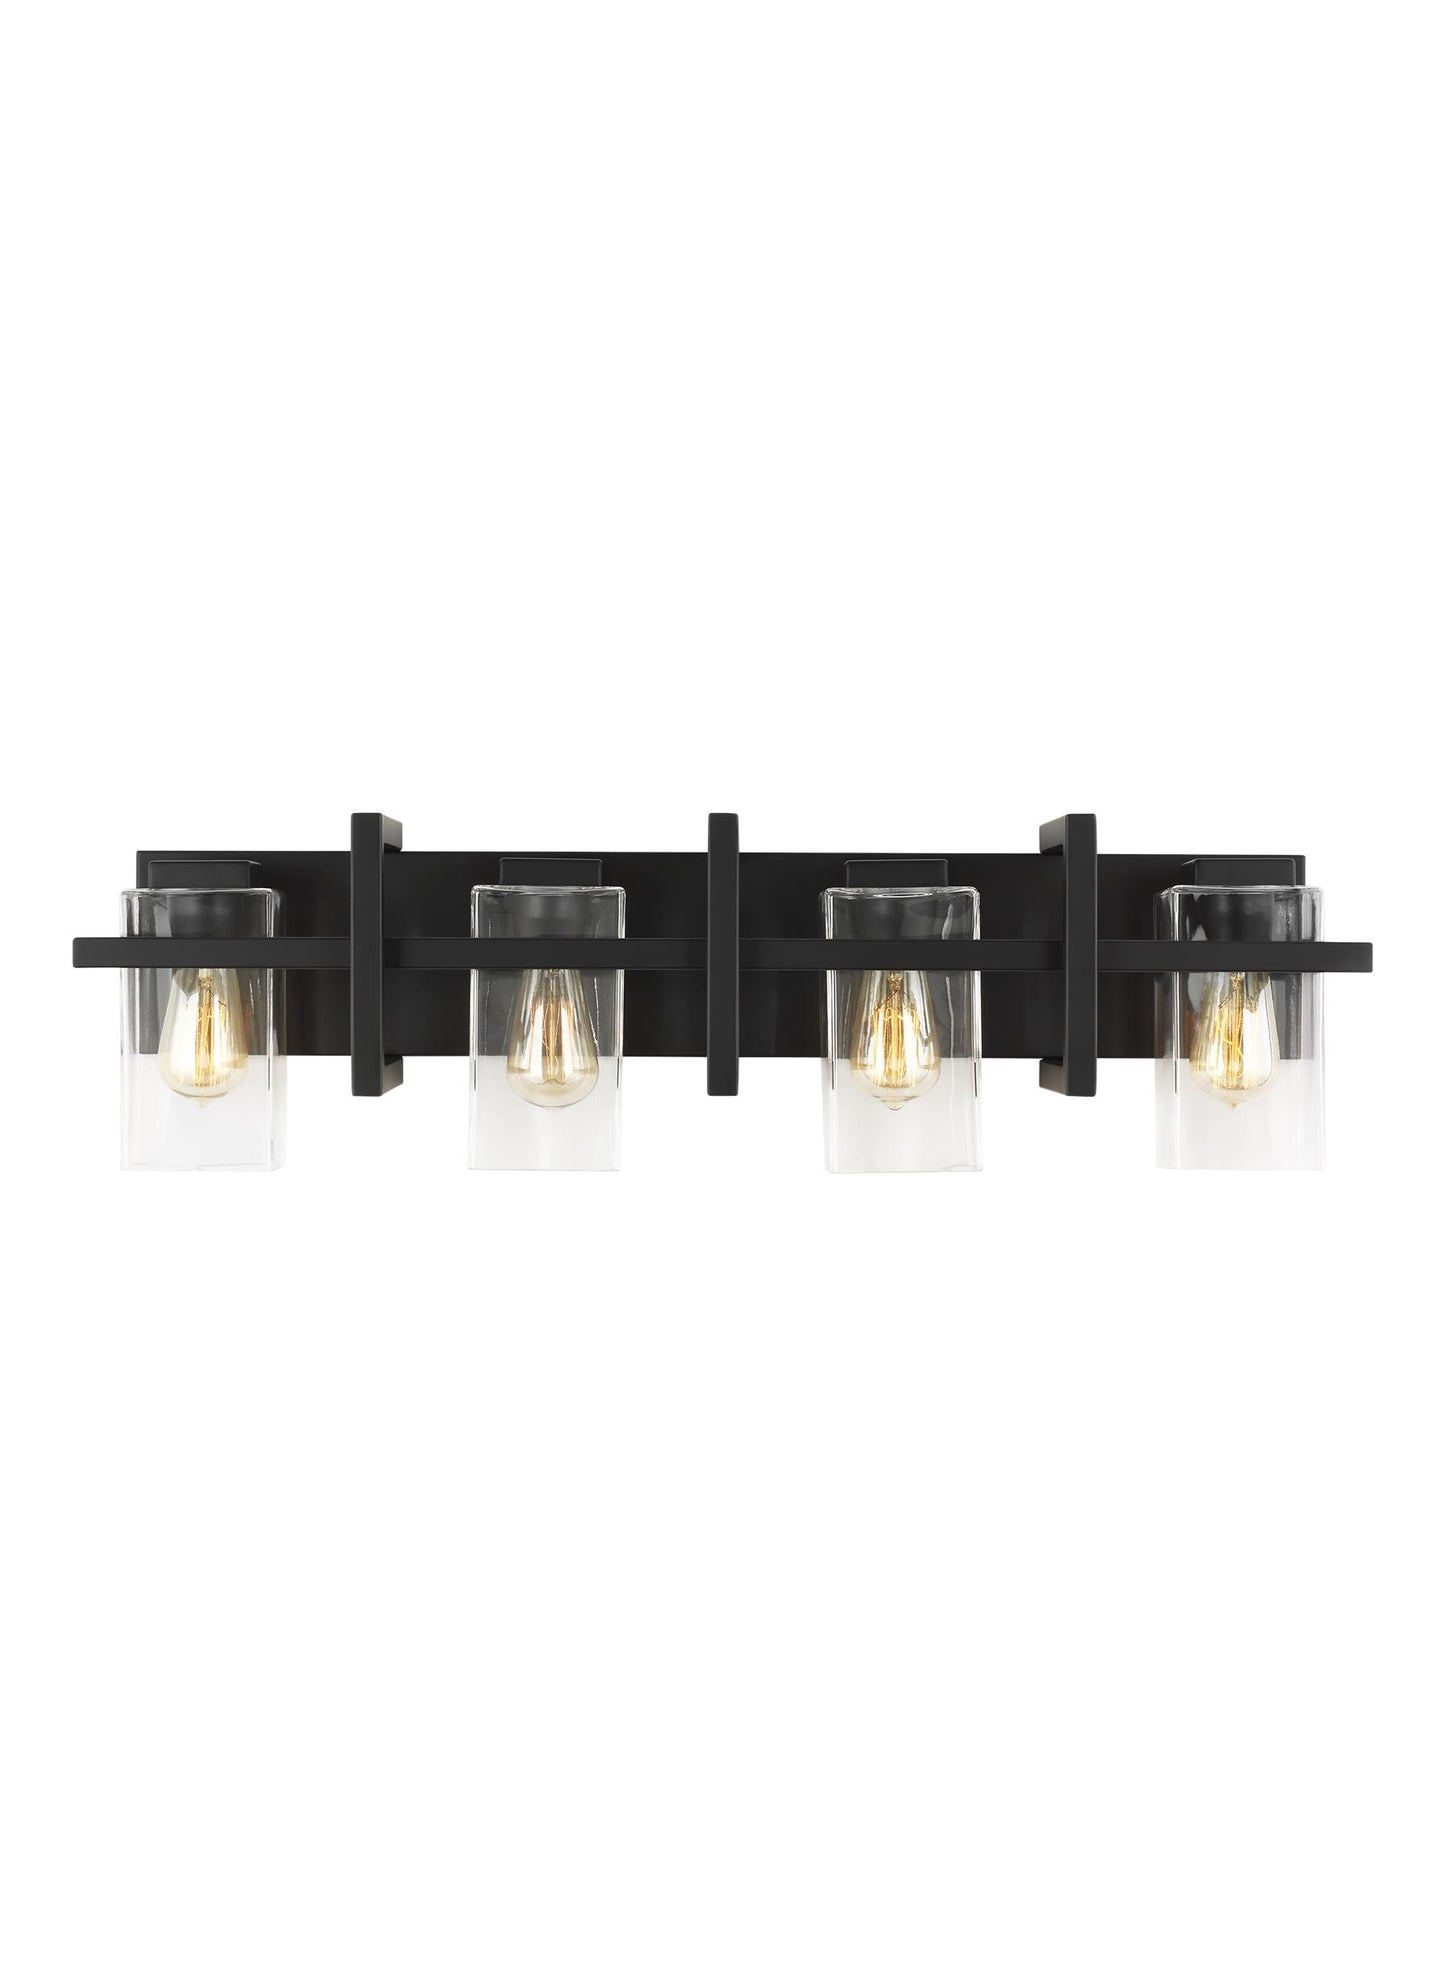 Mitte transitional 4-light indoor dimmable bath vanity wall sconce in midnight black finish with clear glass shades